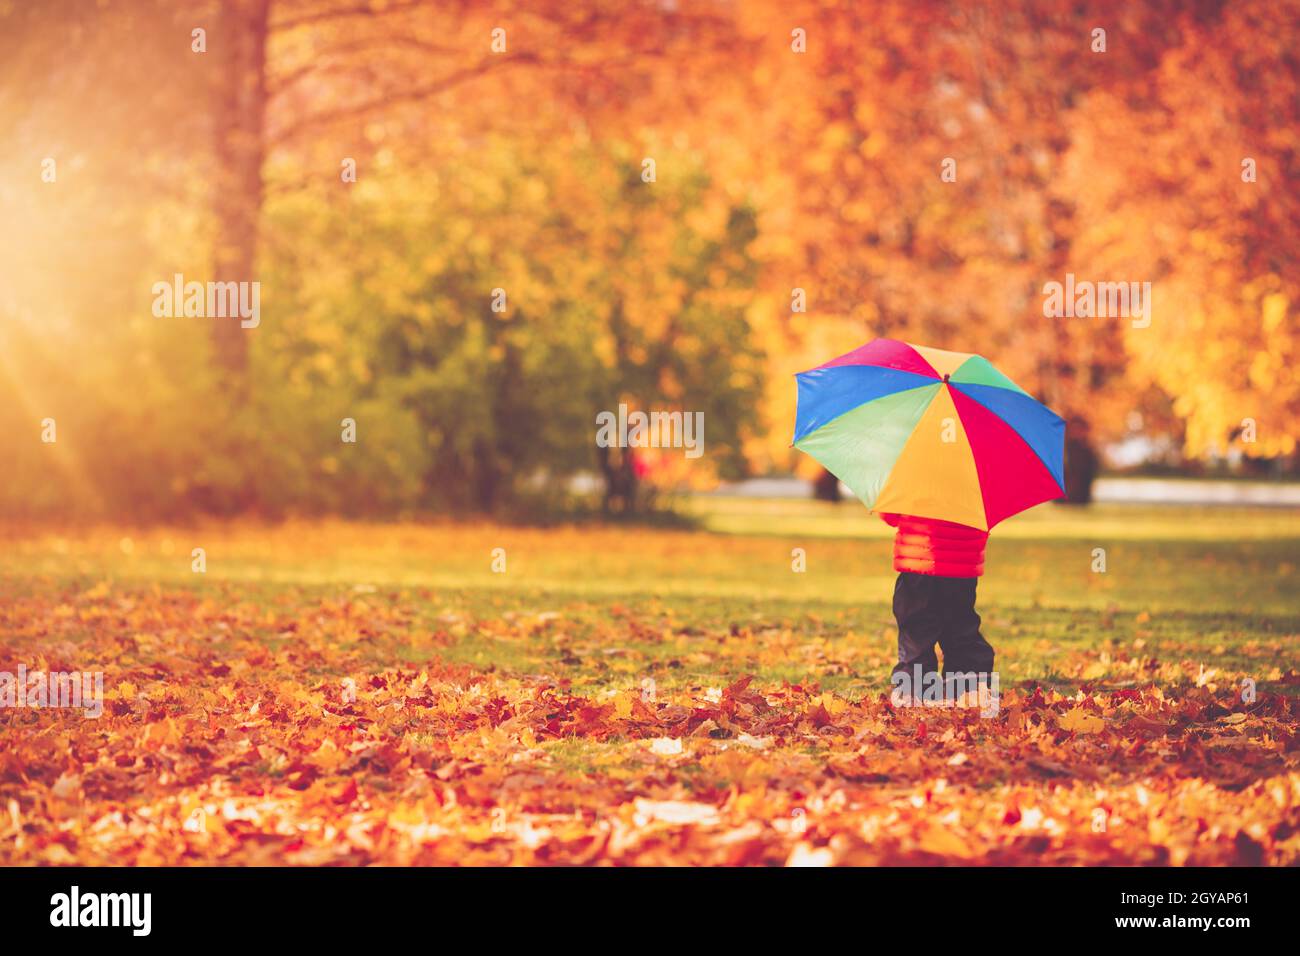 Child standing with umbrella in beautiful autumnal day. Boy playing outdoors in the park with yellow maple leaves falling down Stock Photo